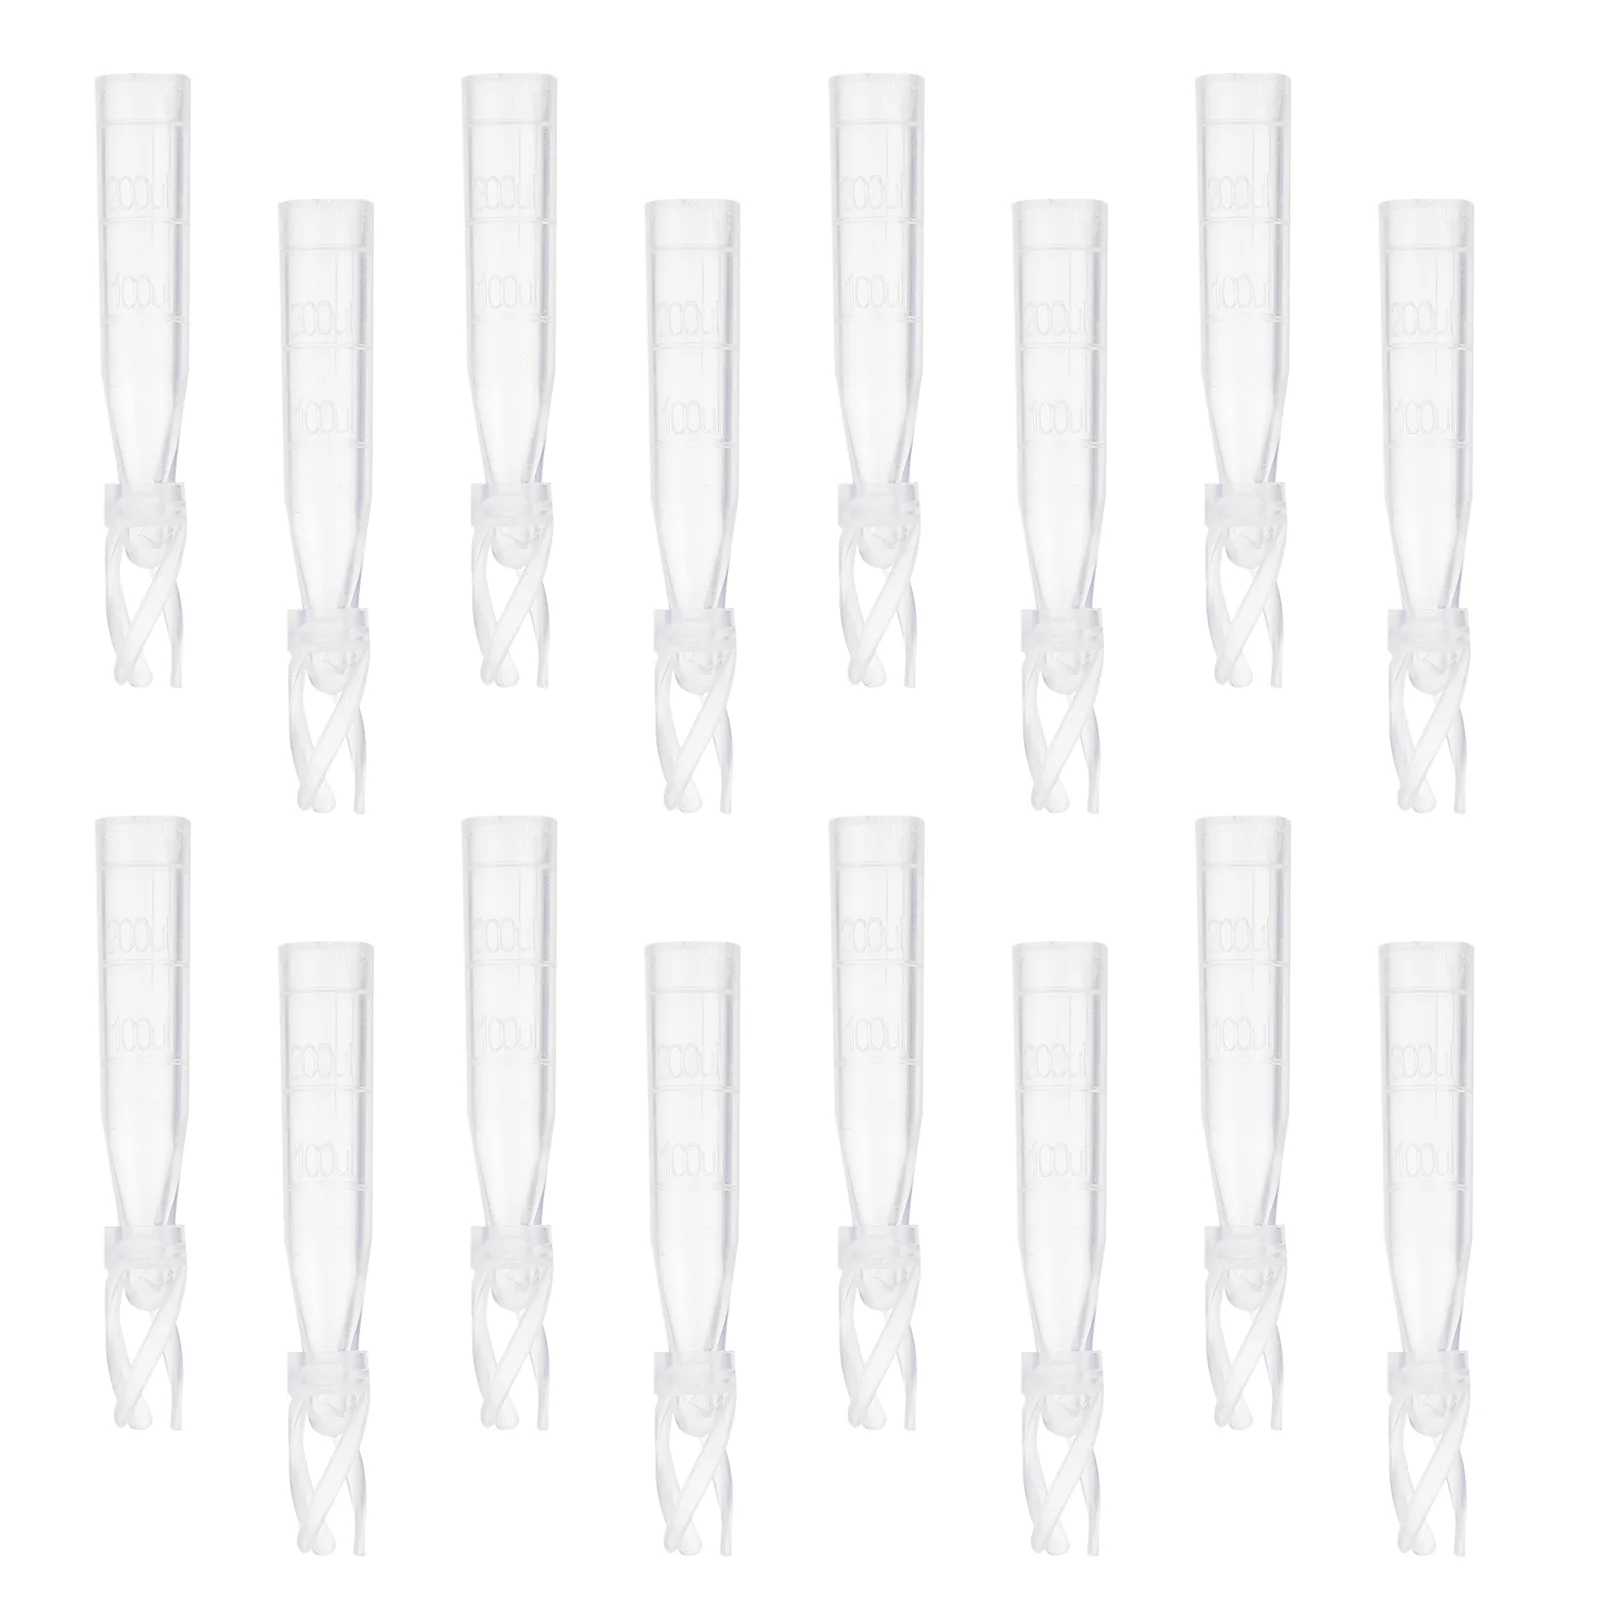 

Test Tube Insert Pipe 250ul Scales Test Pipes Transparent Graduated Laboratory Insert Pipes Vial Insert Pipes for Vial